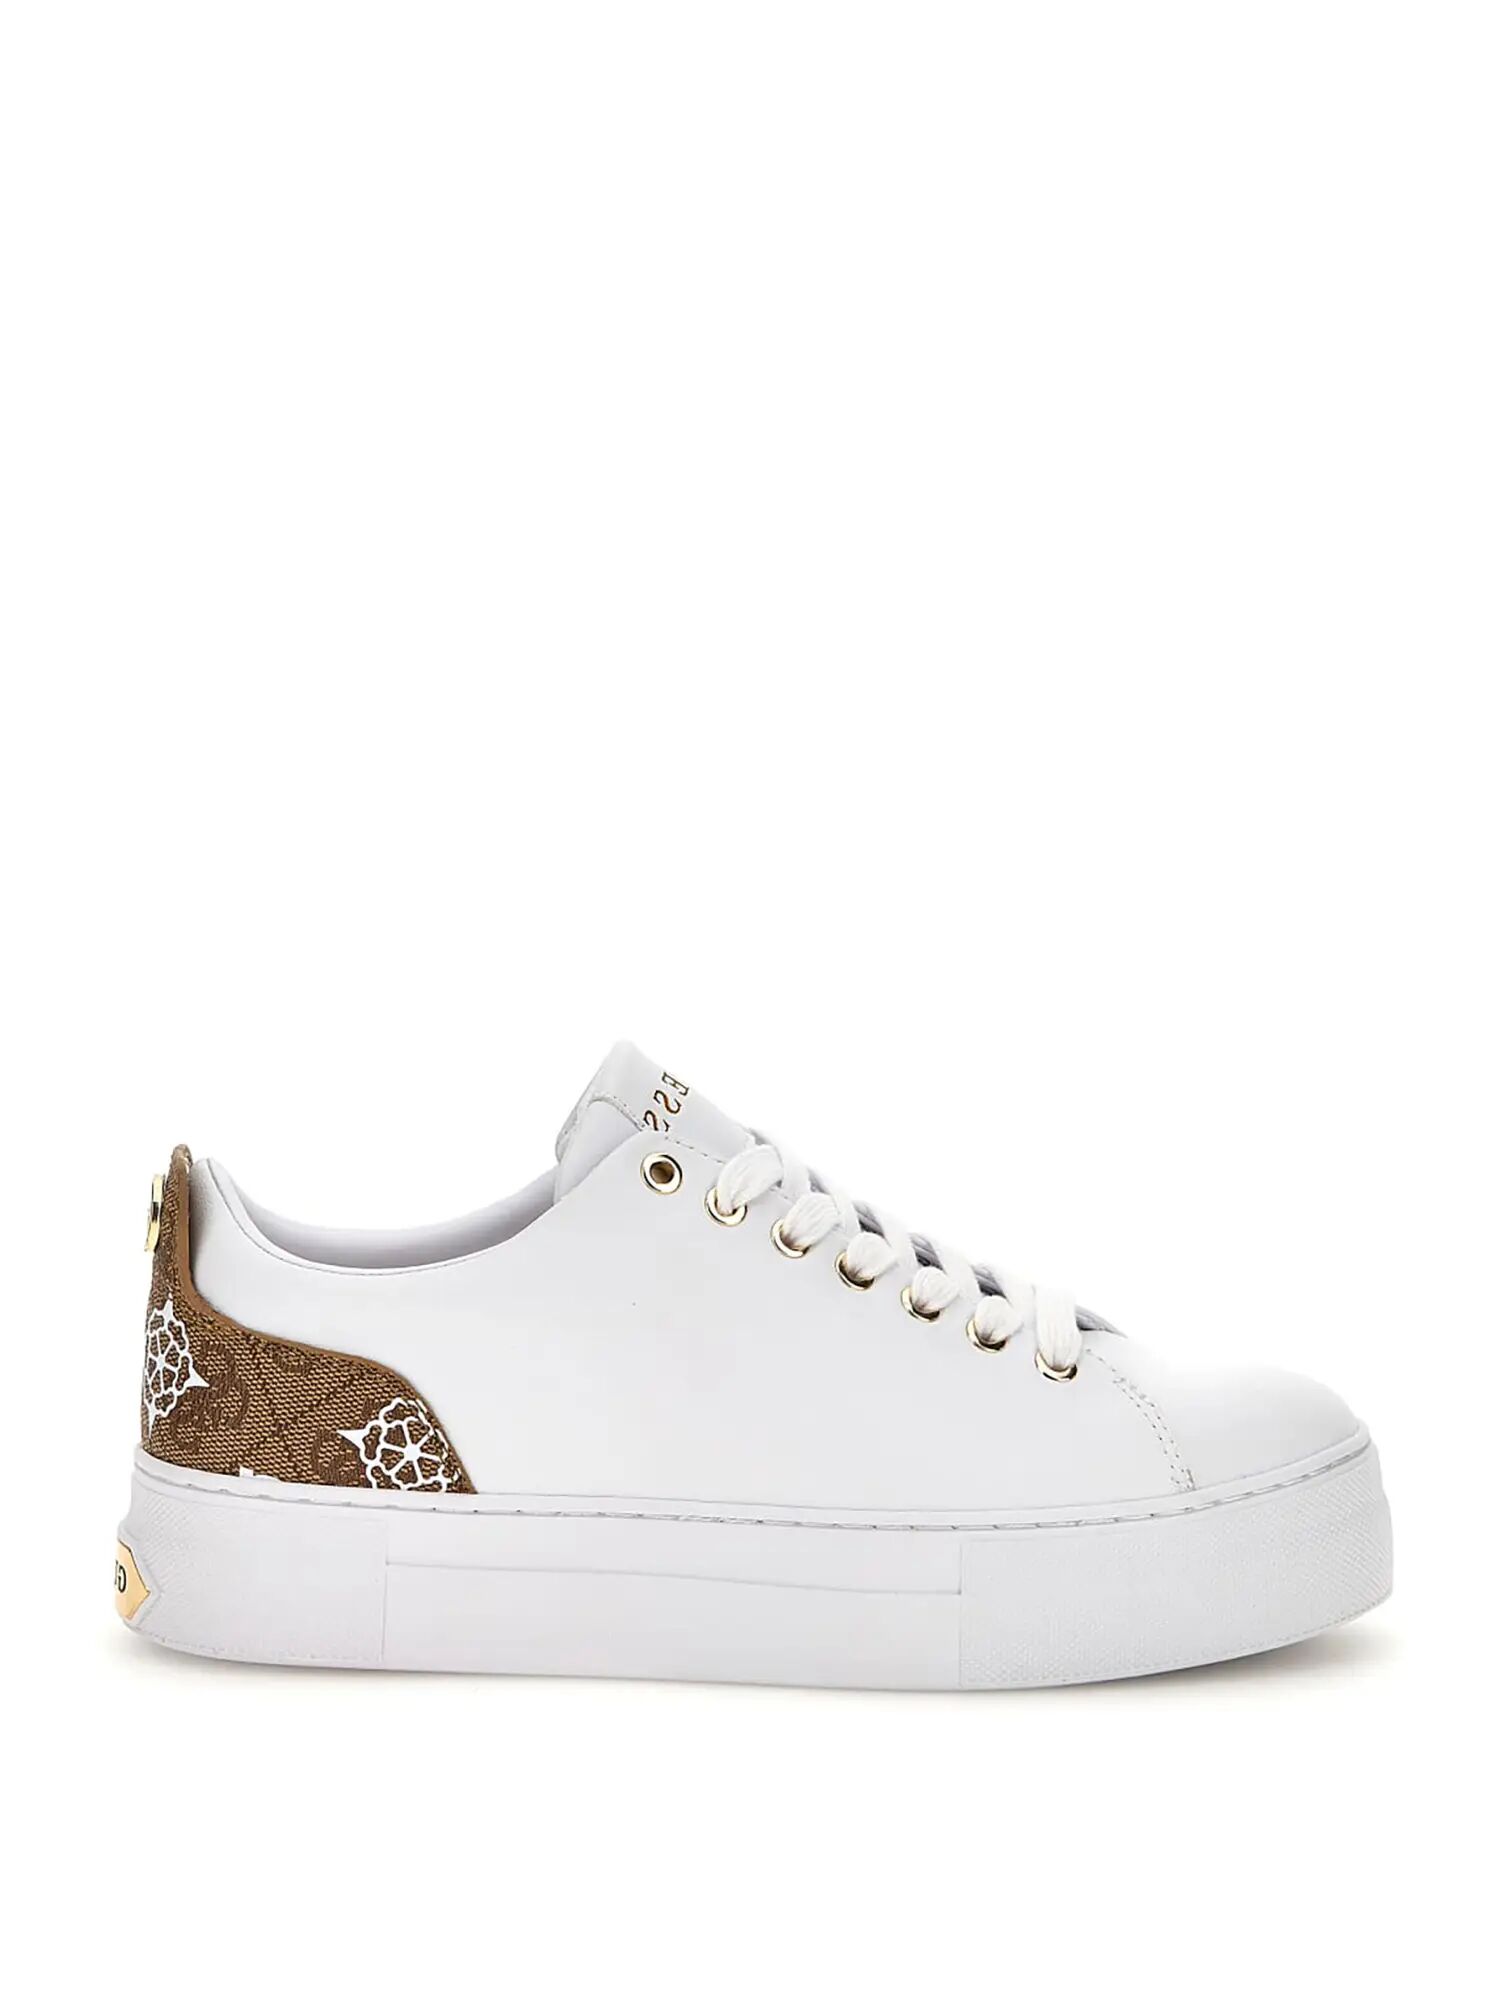 Guess Sneakers Bianche Donna BIANCO 35